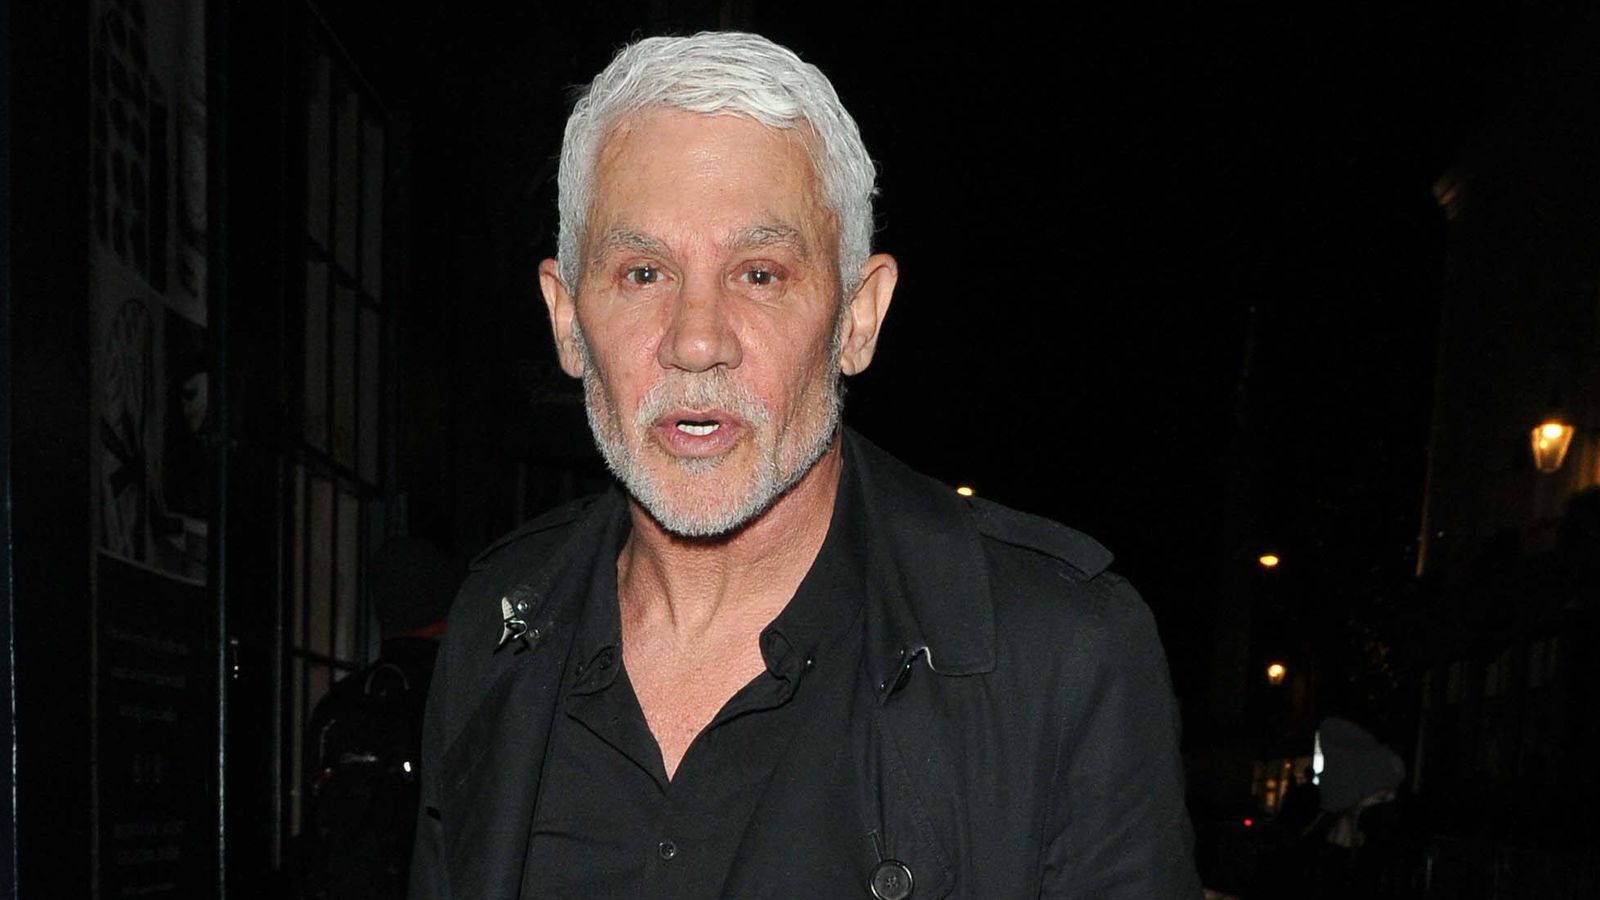 Wayne Lineker thanks friend for taking him to hospital after Ibiza incident